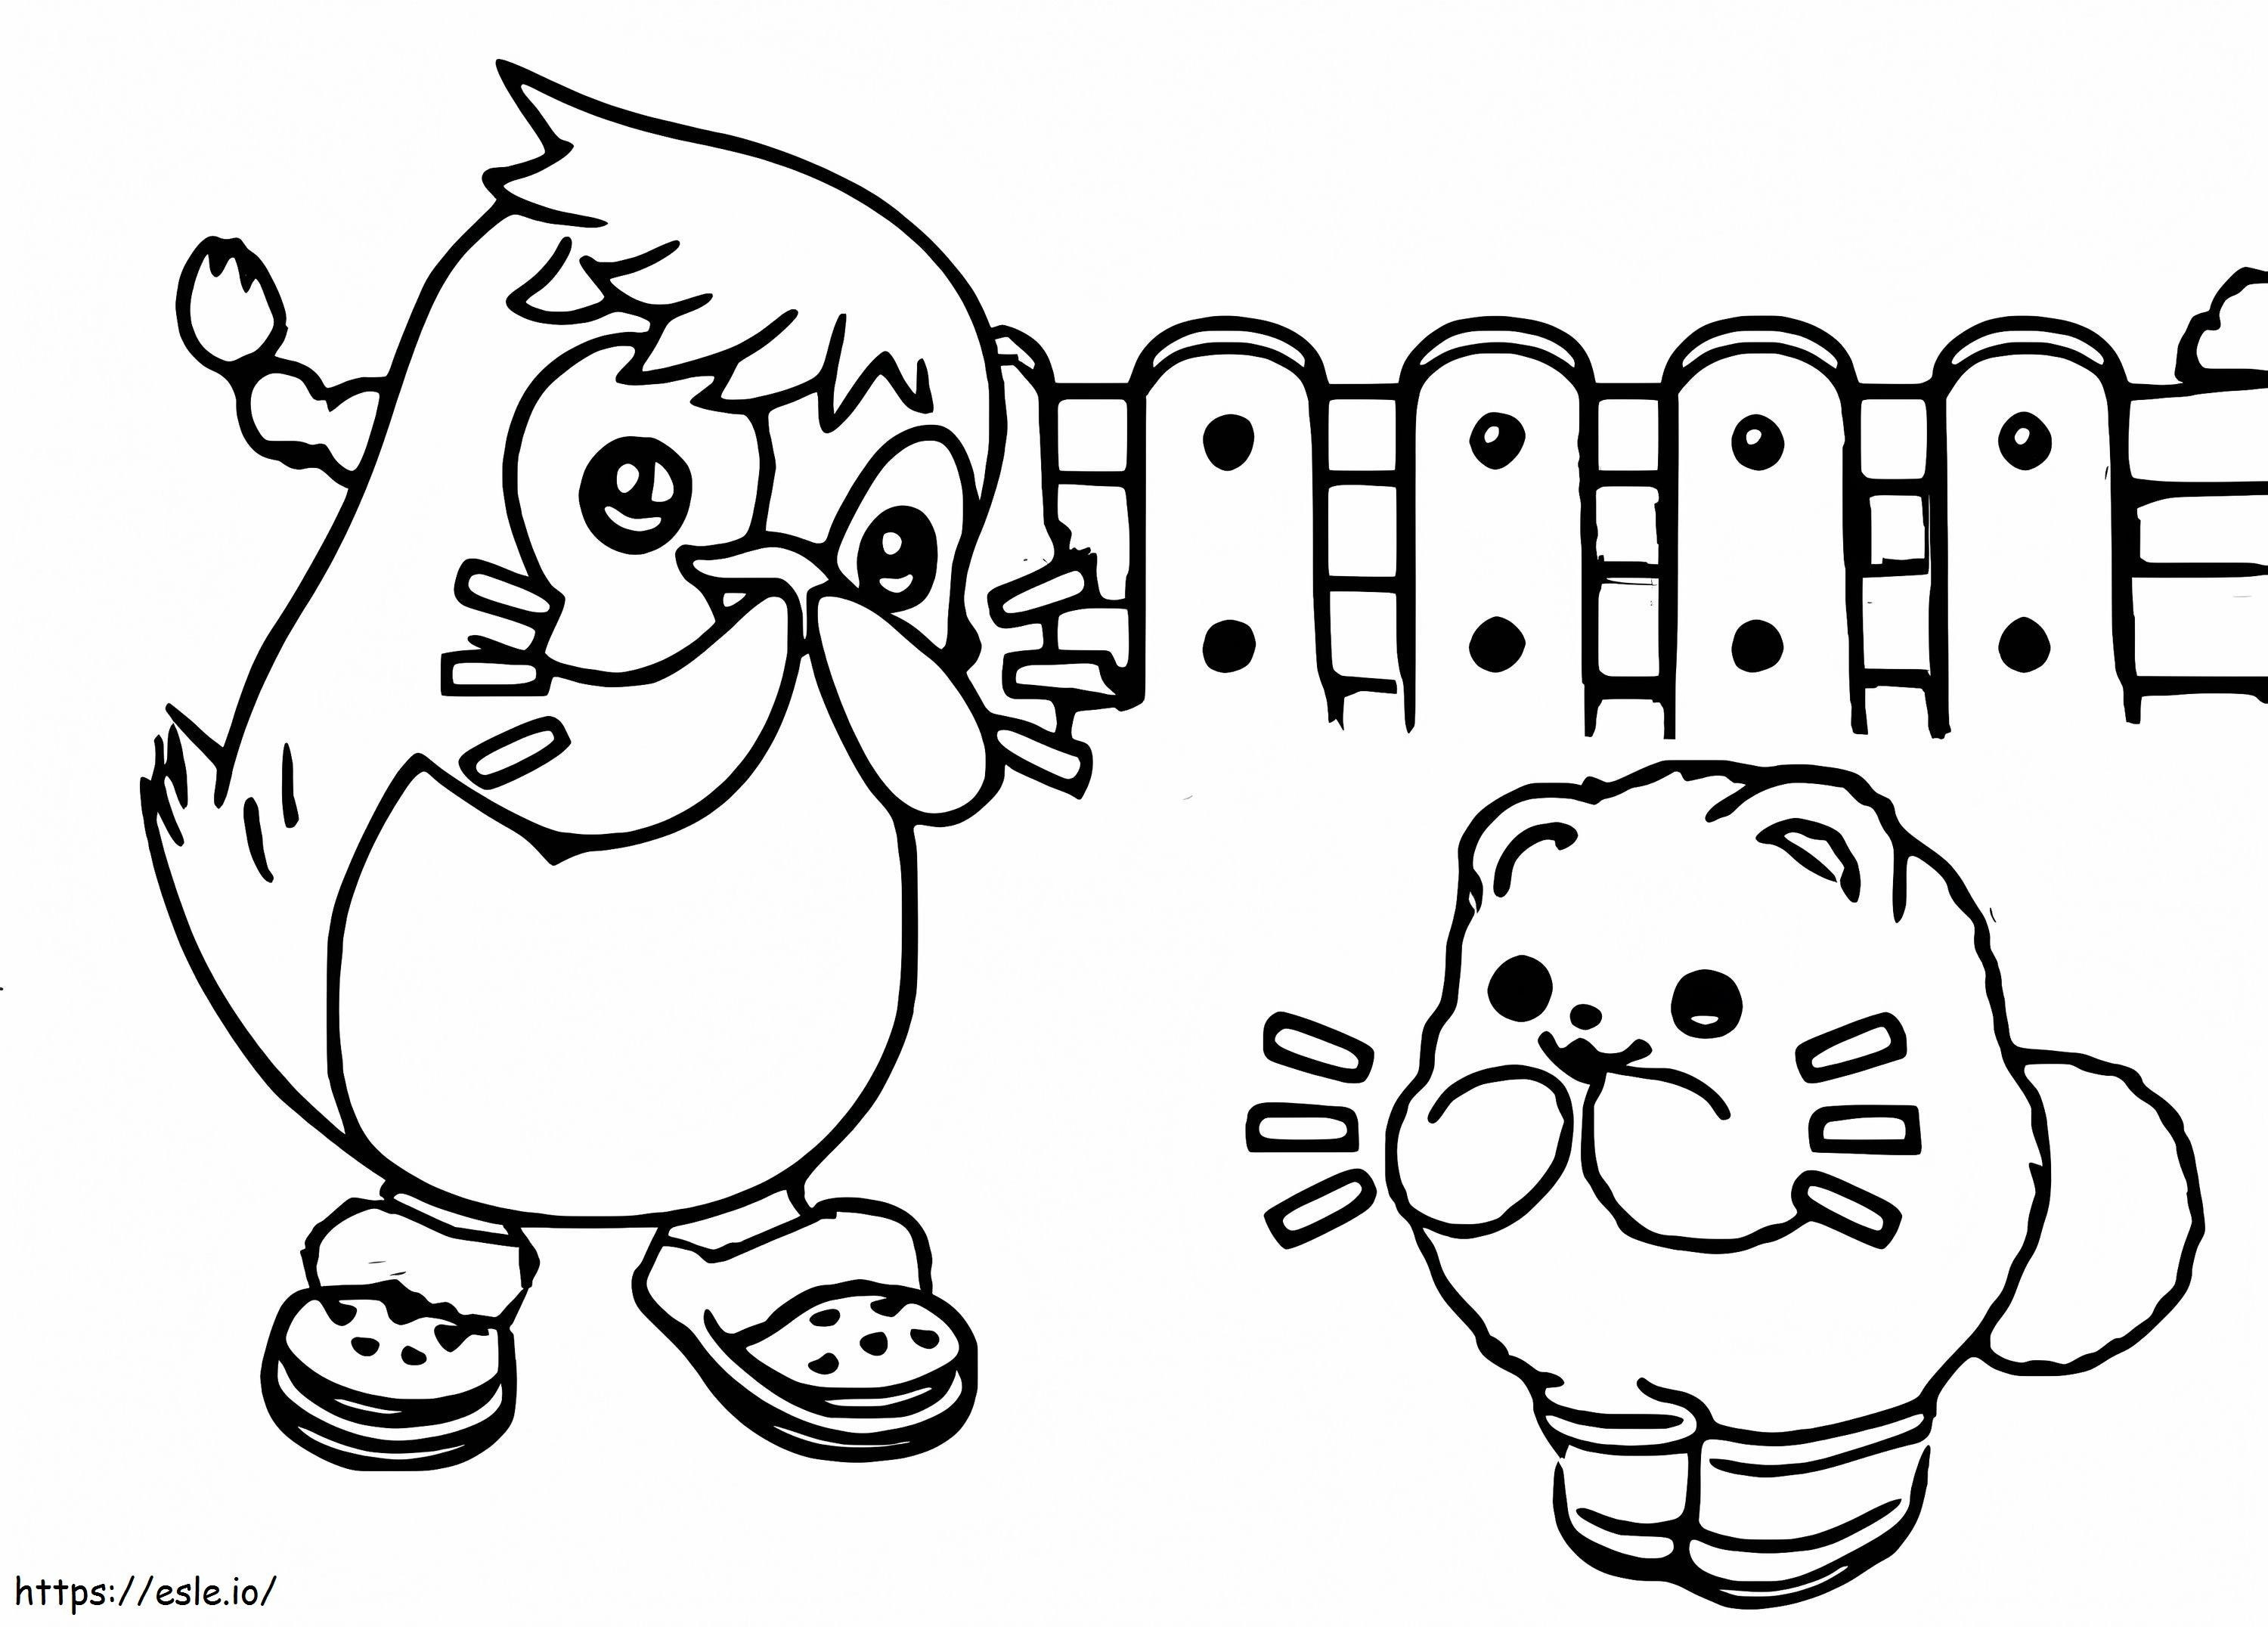 Jessie And Bada From Badanamu coloring page